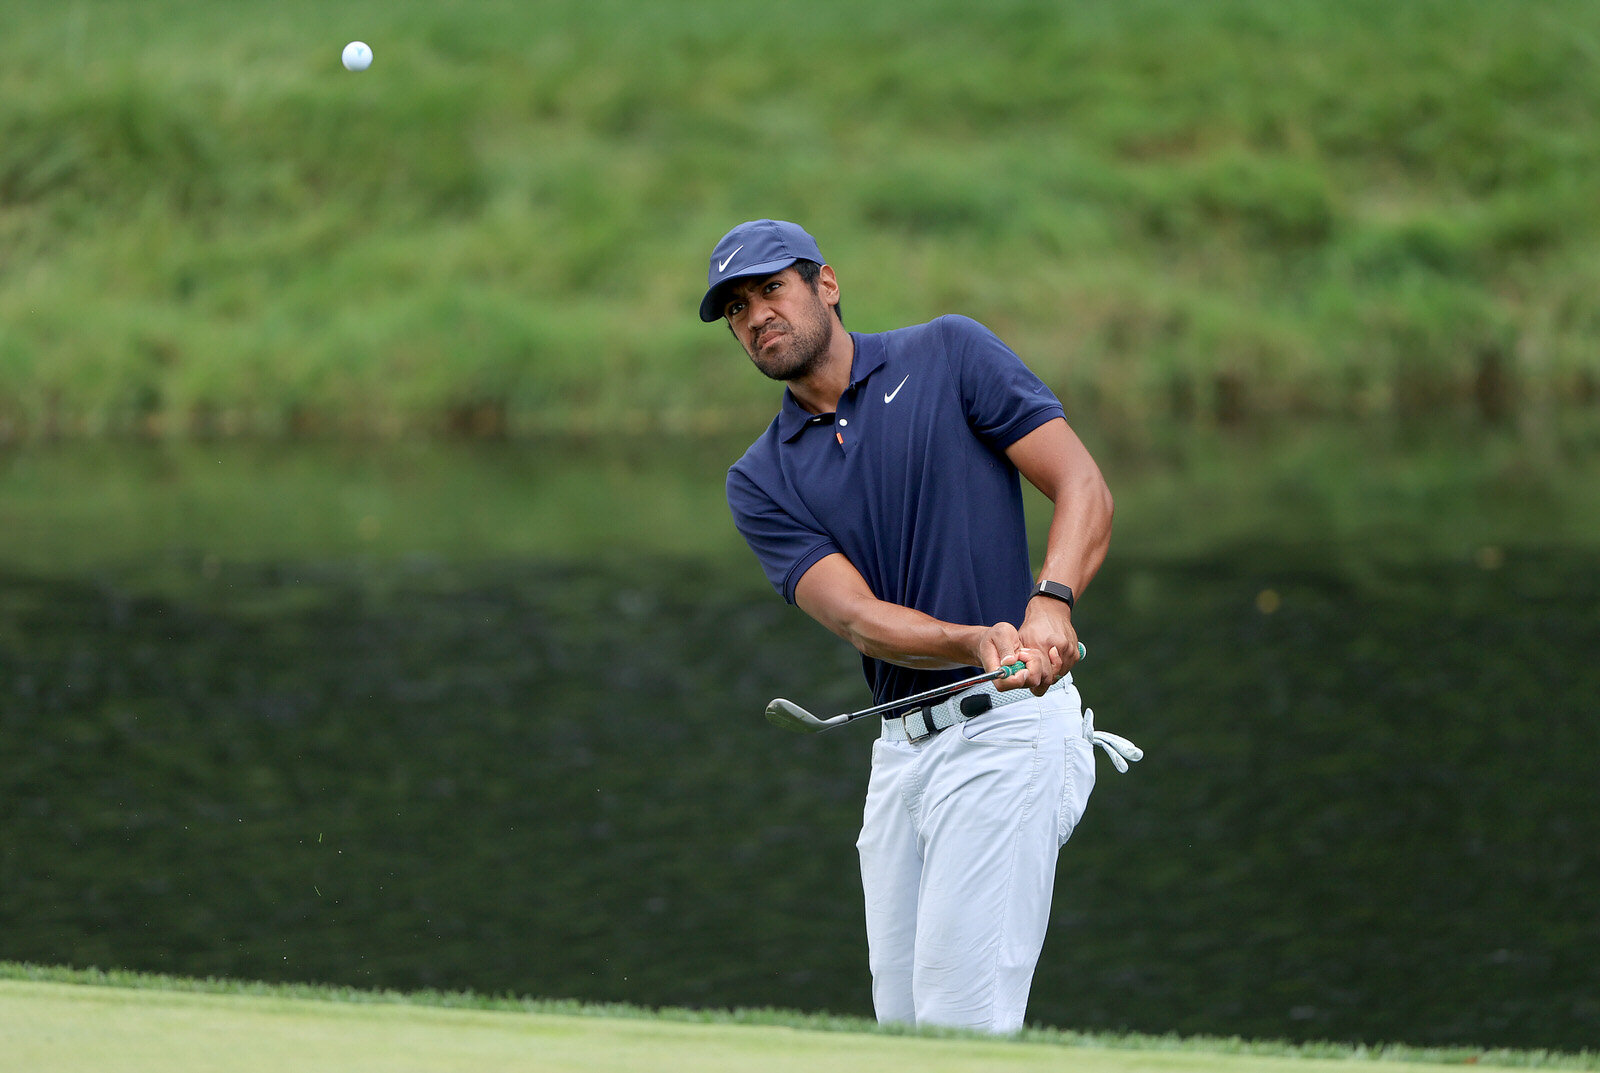  DUBLIN, OHIO - JULY 16: Tony Finau of the United States plays a shot on the third hole during the first round of The Memorial Tournament on July 16, 2020 at Muirfield Village Golf Club in Dublin, Ohio. (Photo by Sam Greenwood/Getty Images) 